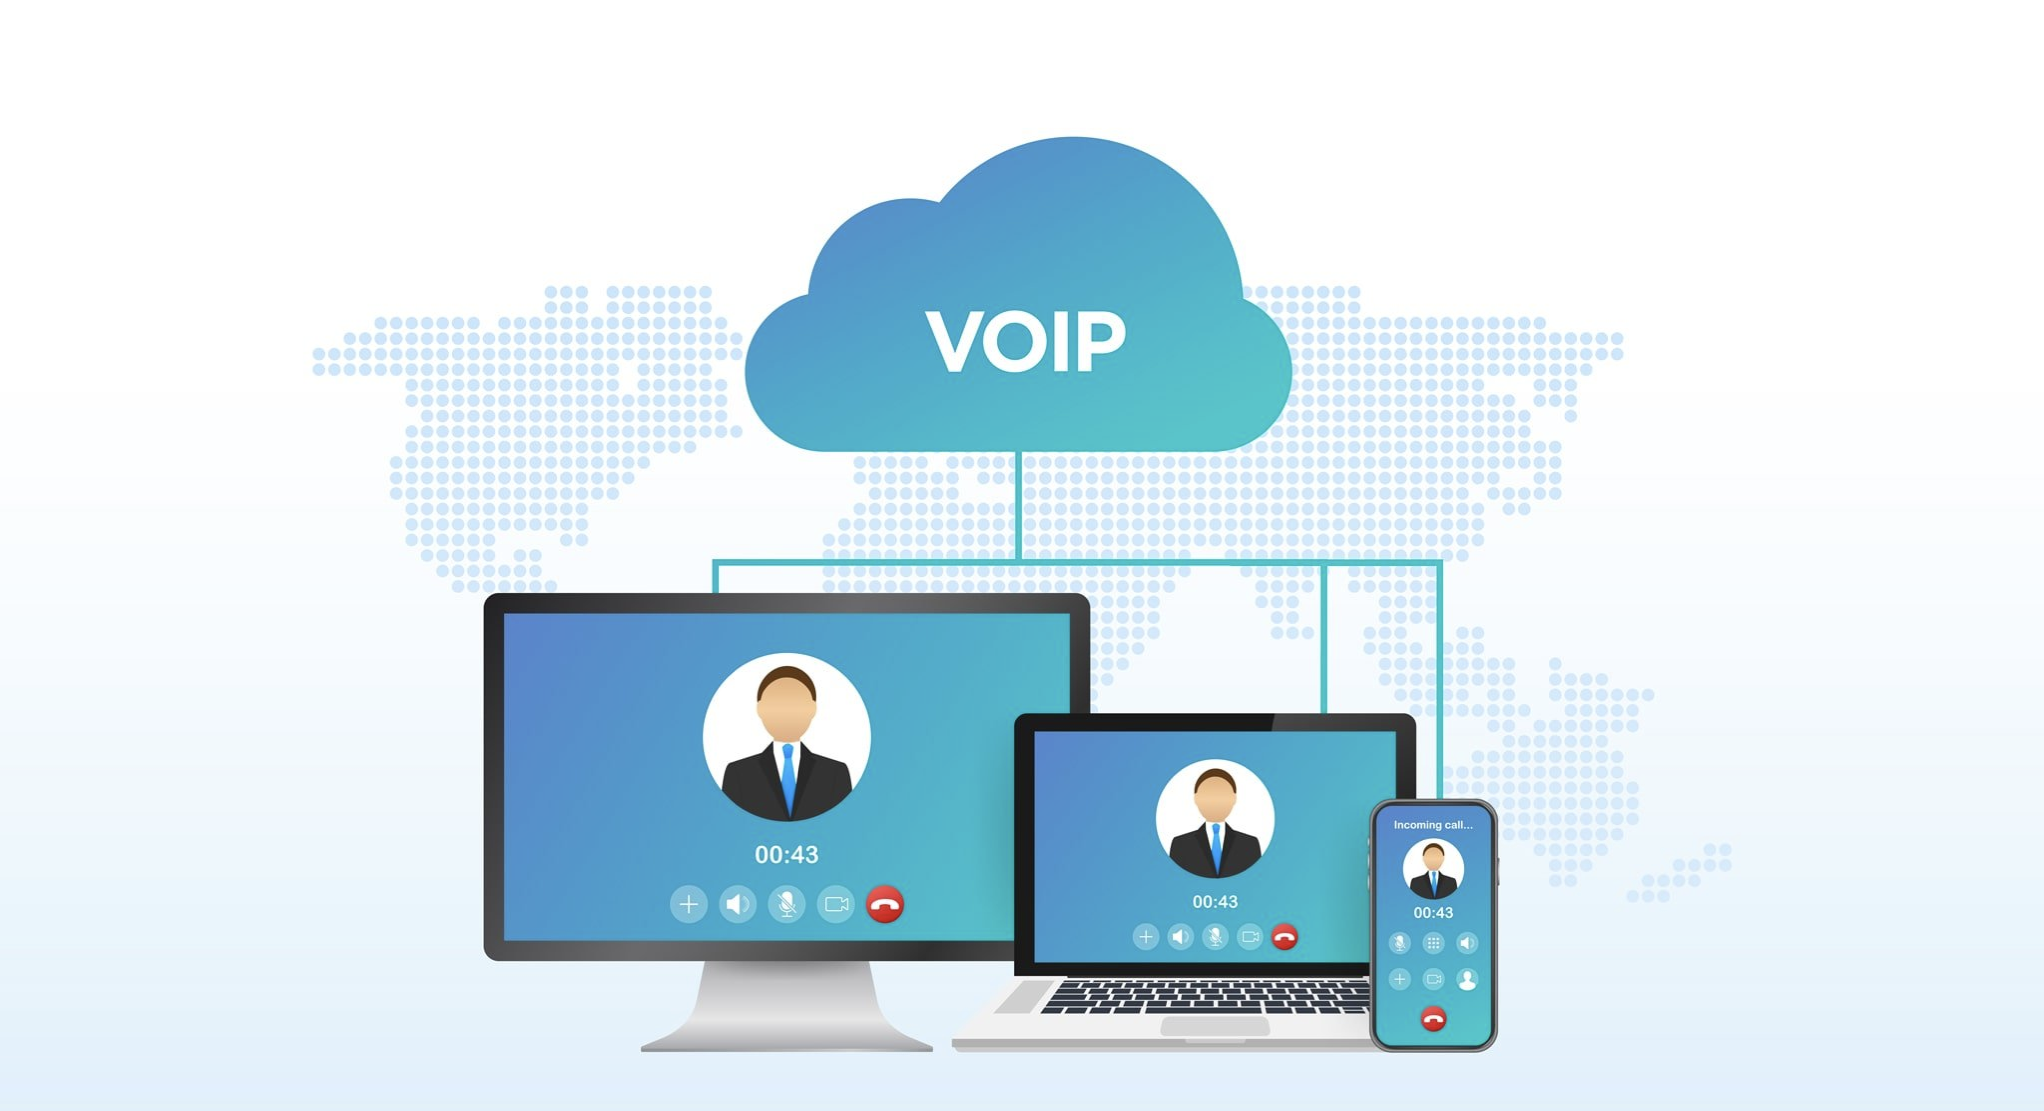 how to create a application to make viop call